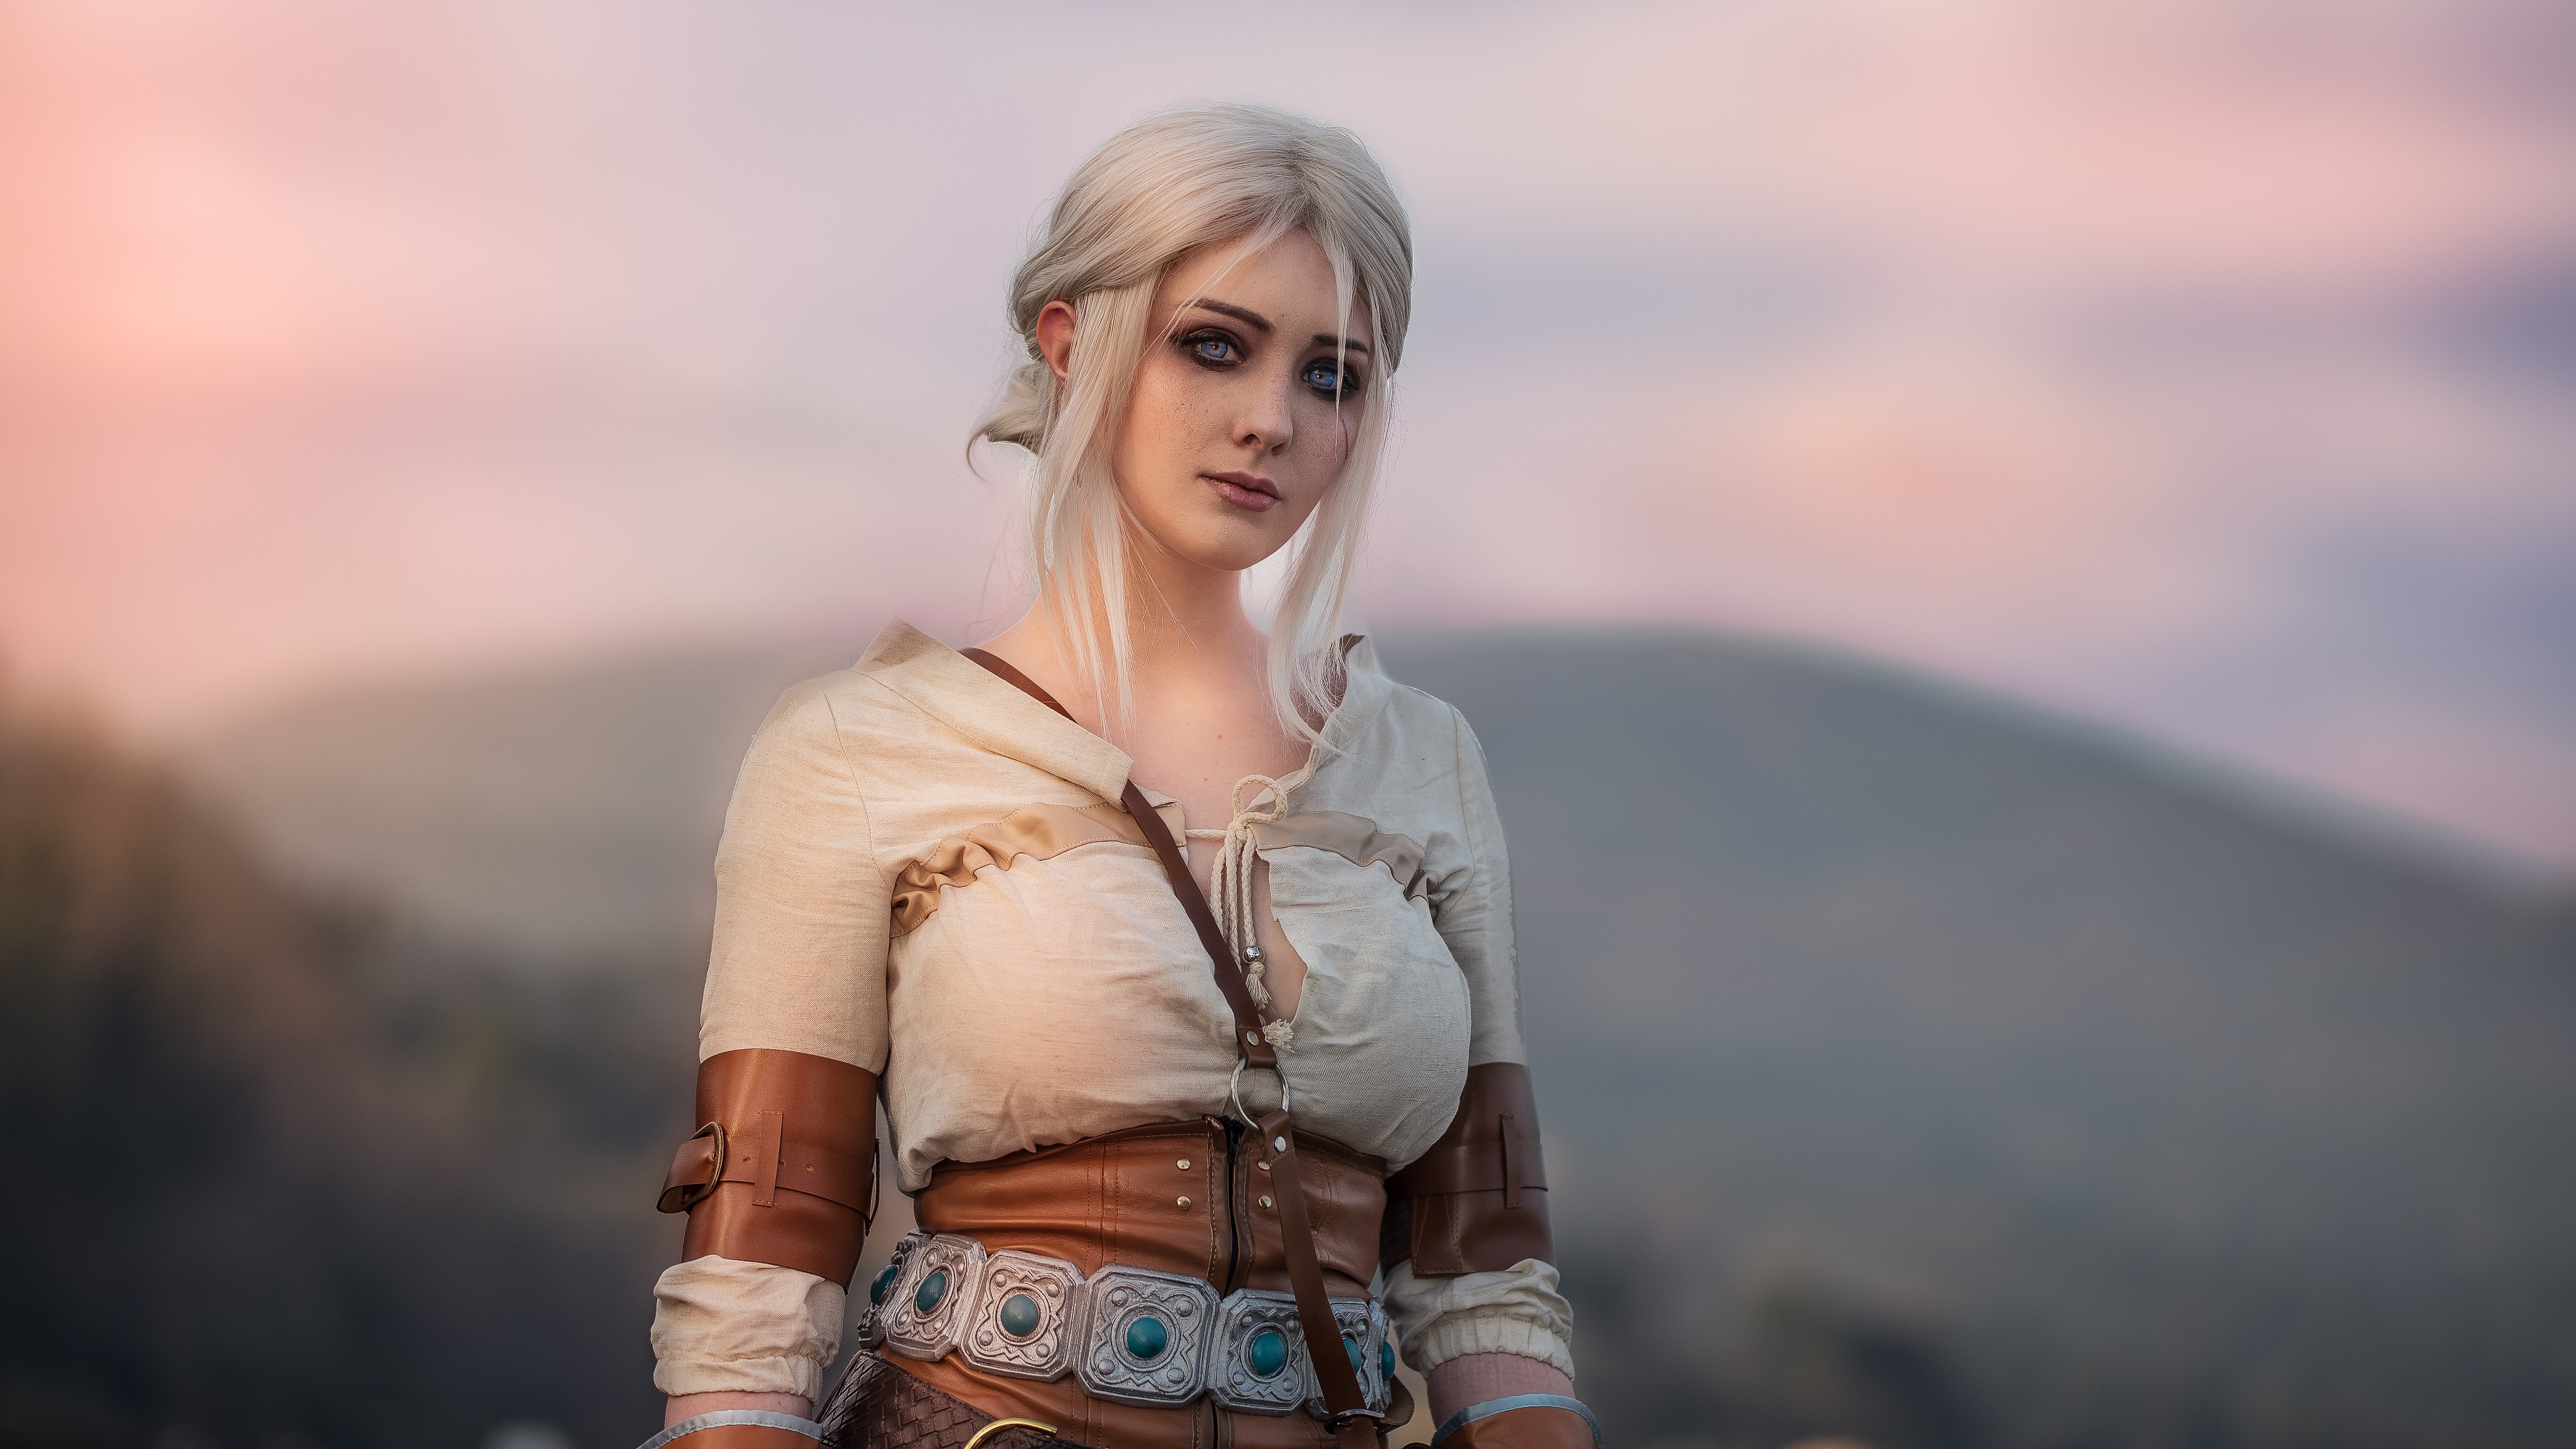 Wallpaper, Blue Snow, model, looking at viewer, portrait, depth of field, cosplay, Ciri, The Witcher, video game girls, video games, medieval, Cirilla Fiona Elen Riannon, white hair, shirt, corset, fantasy girl